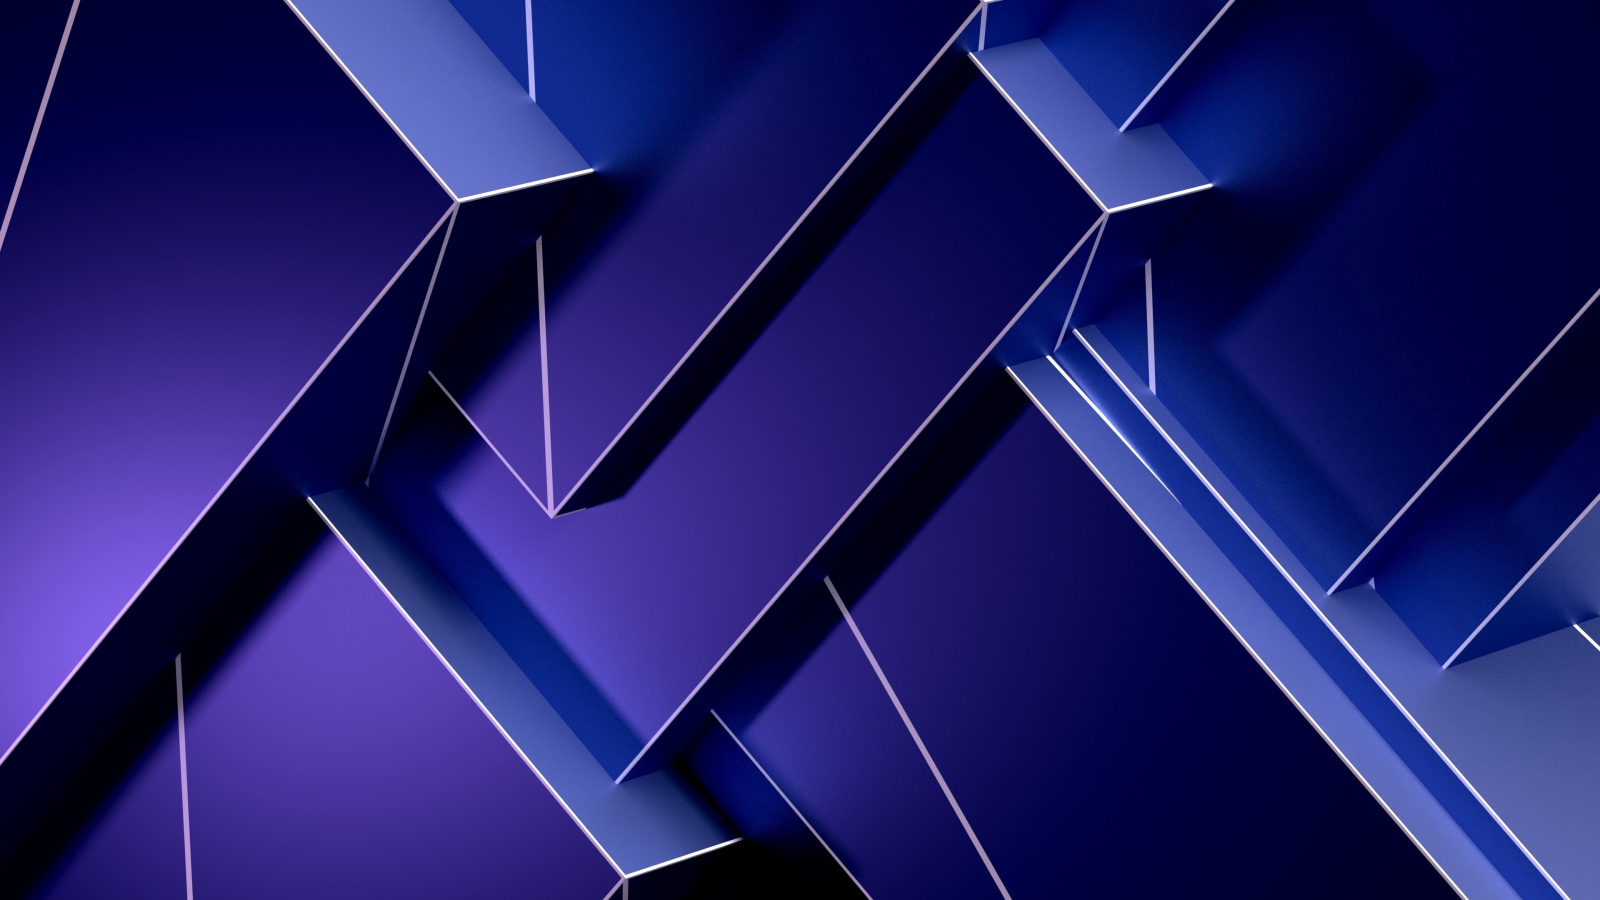 Download wallpaper 1600x900 pattern, white lines, blue background,  geometry, abstract, 16:9 widescreen 1600x900 hd background, 1570